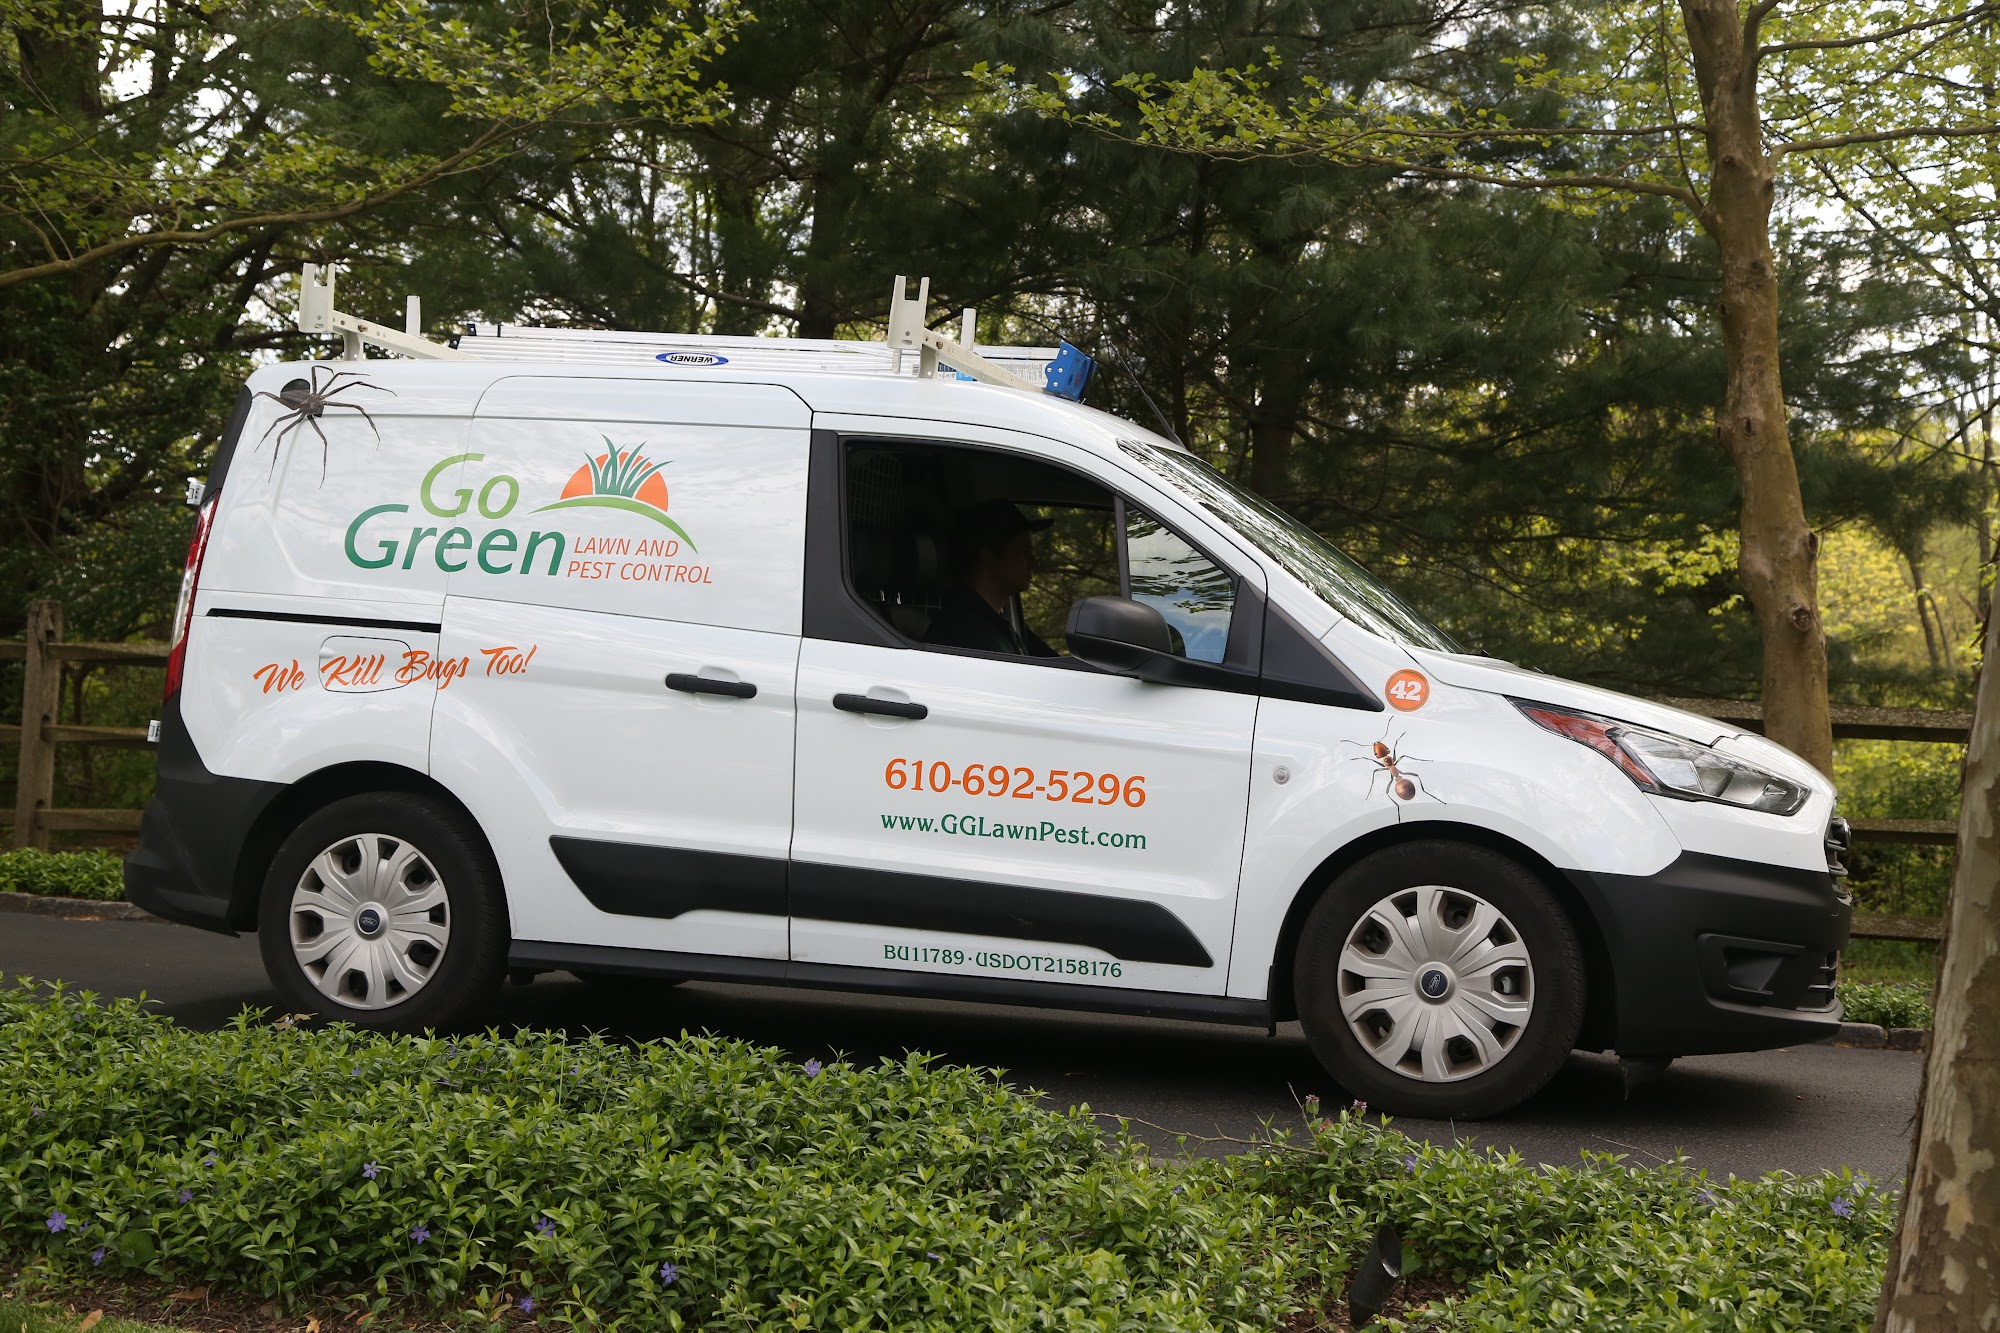 Go Green Lawn and Pest Control